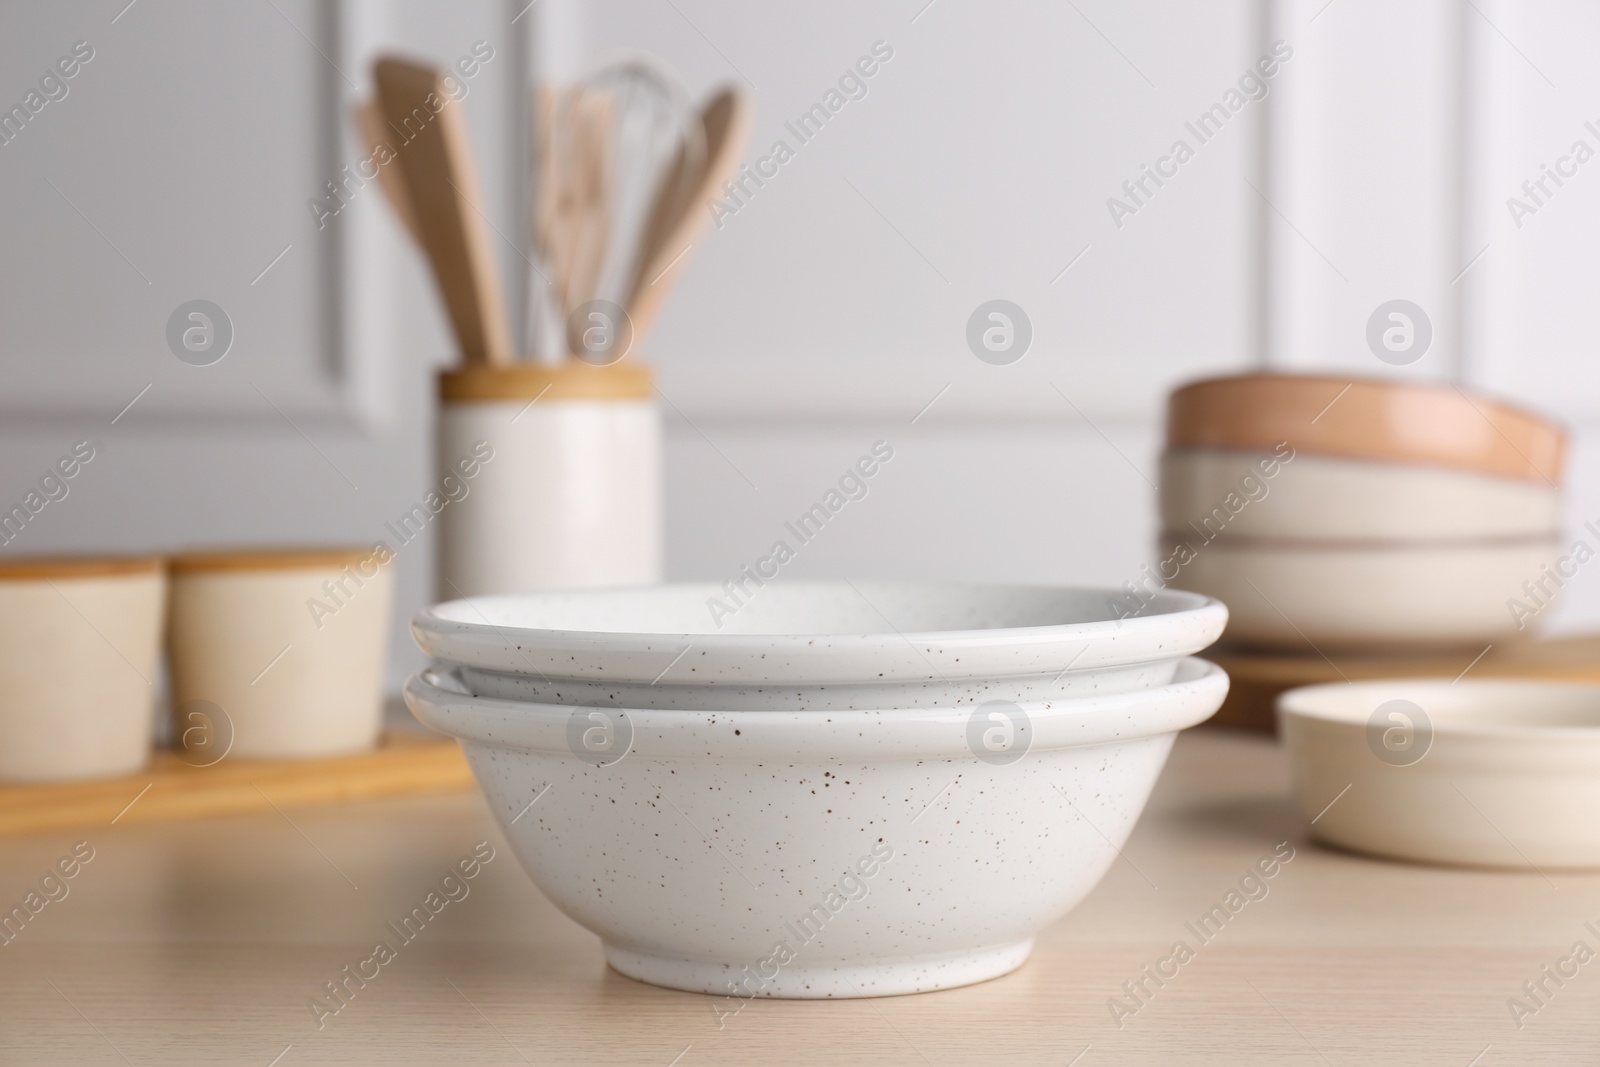 Photo of Two ceramic bowls on wooden table indoors